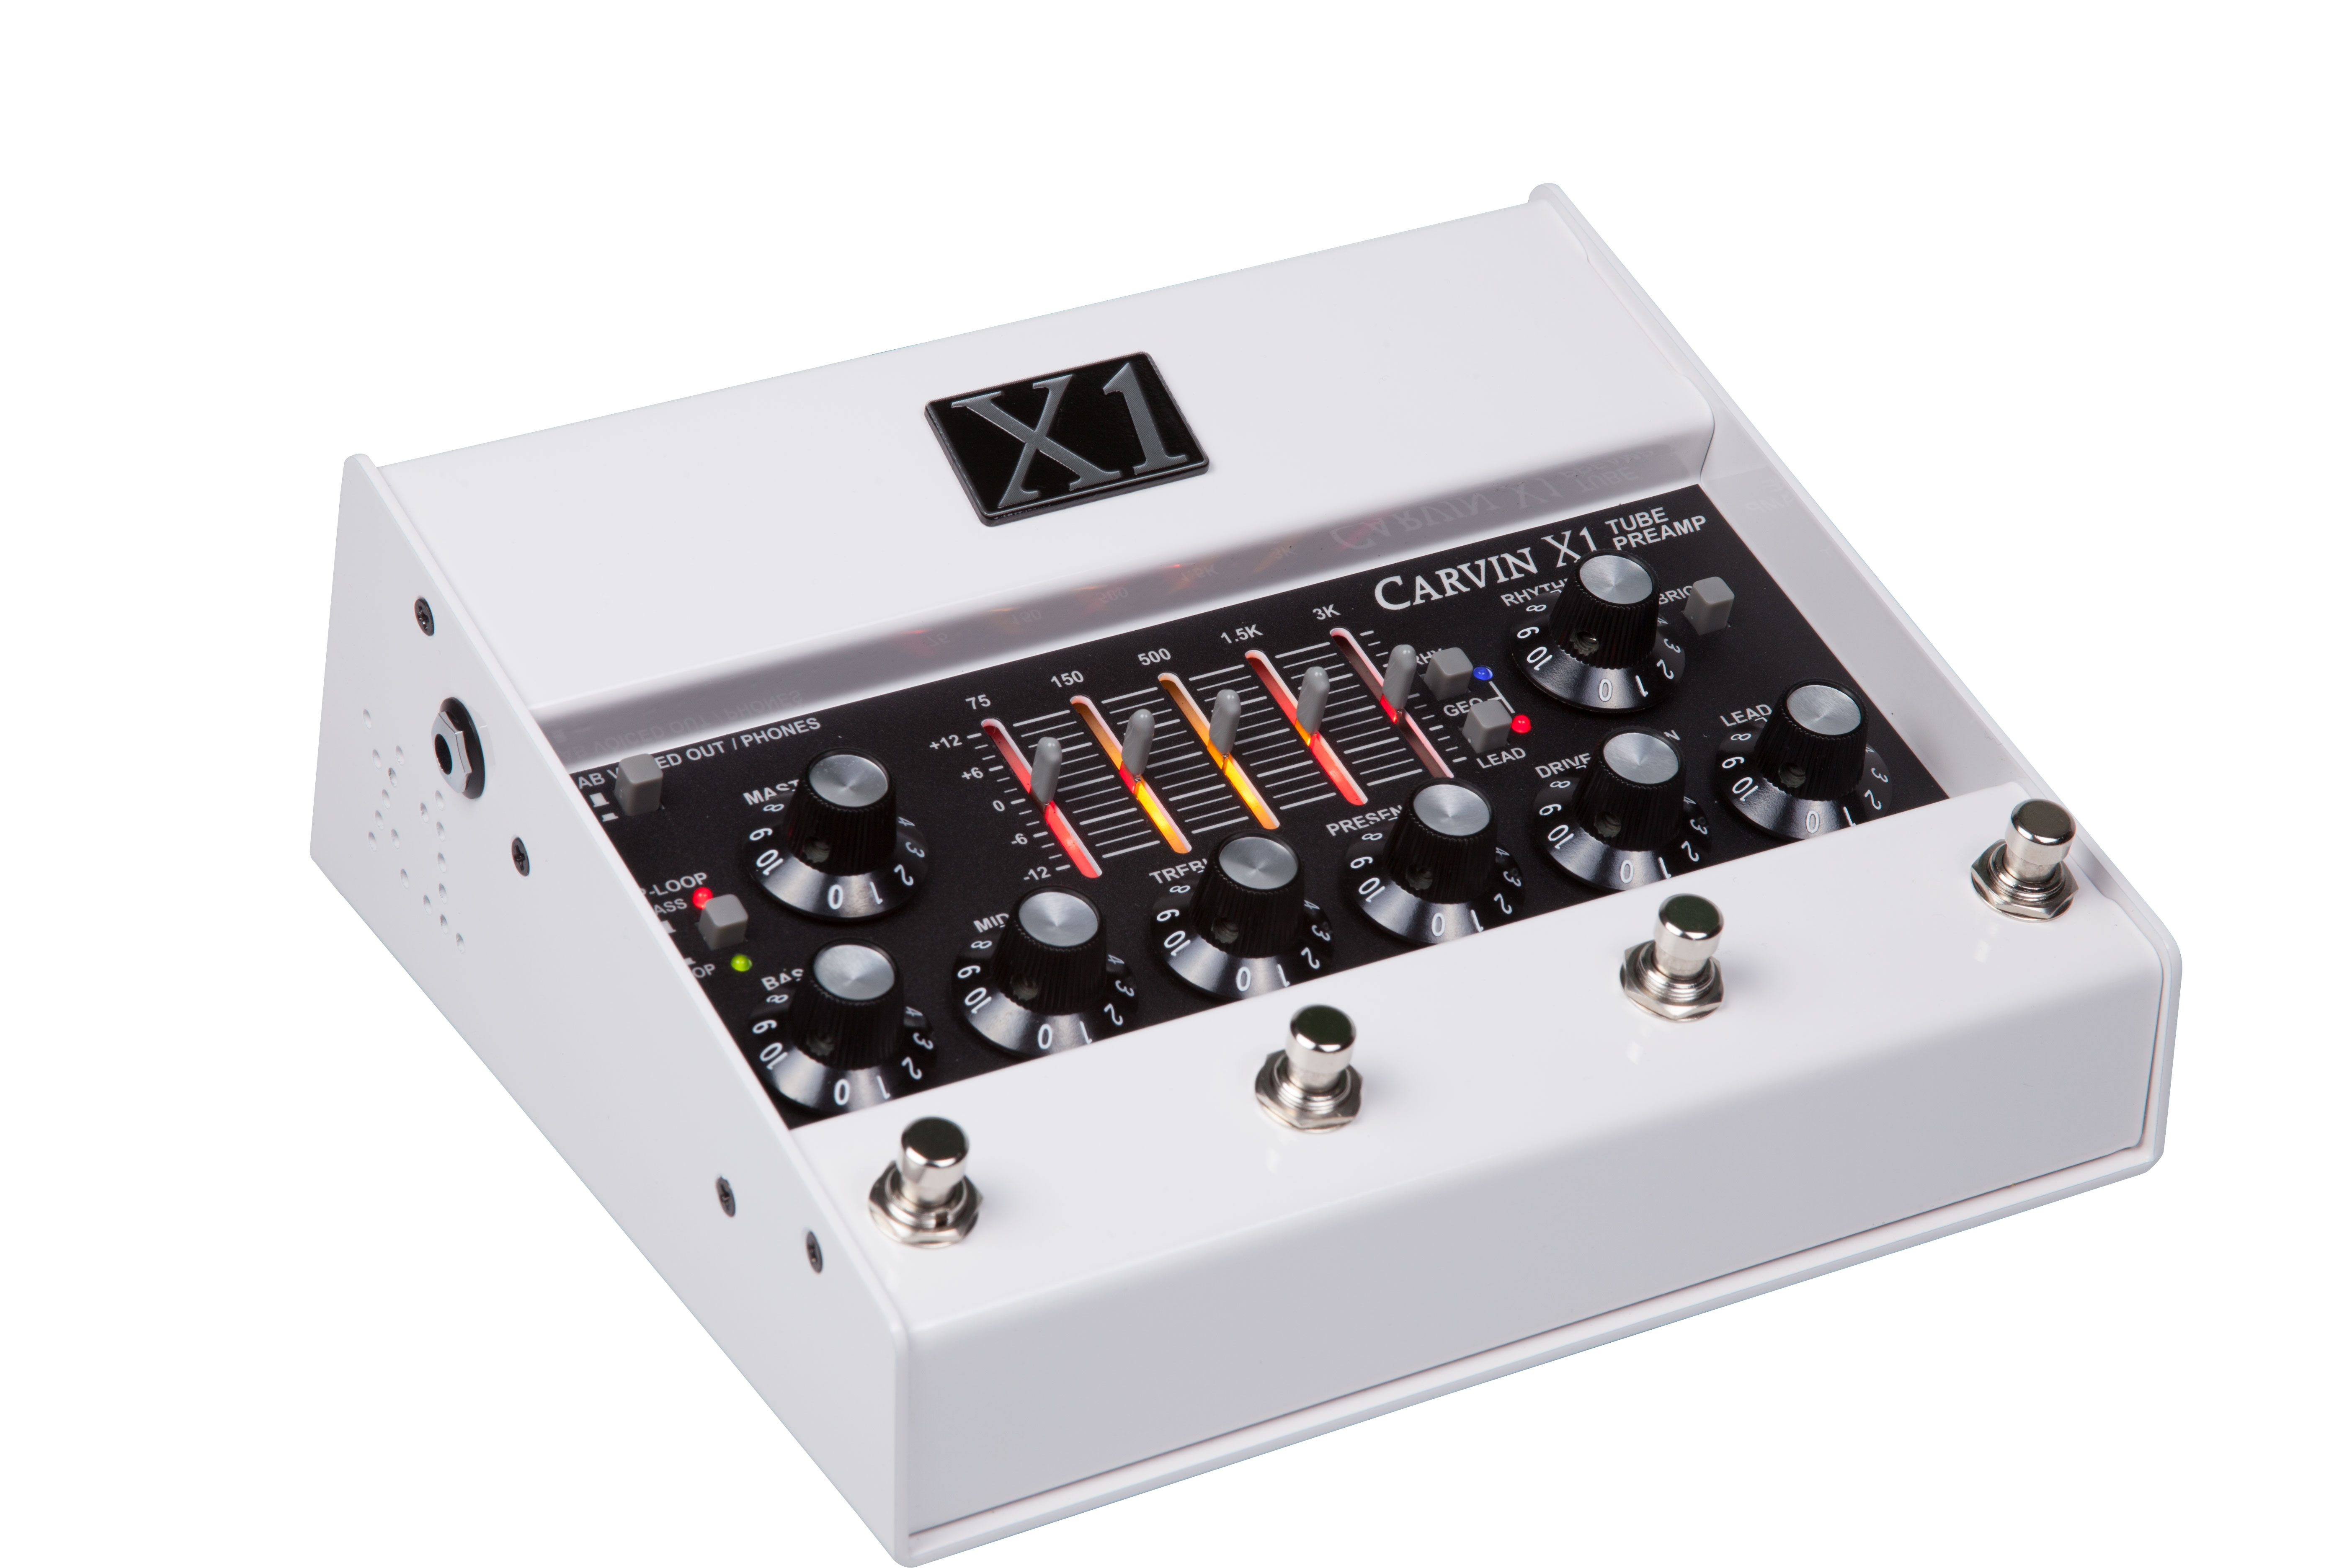 onduidelijk Precies poll Carvin Amps: New X1 All Tube Preamp Pedal Now Available – MusicPlayers.com